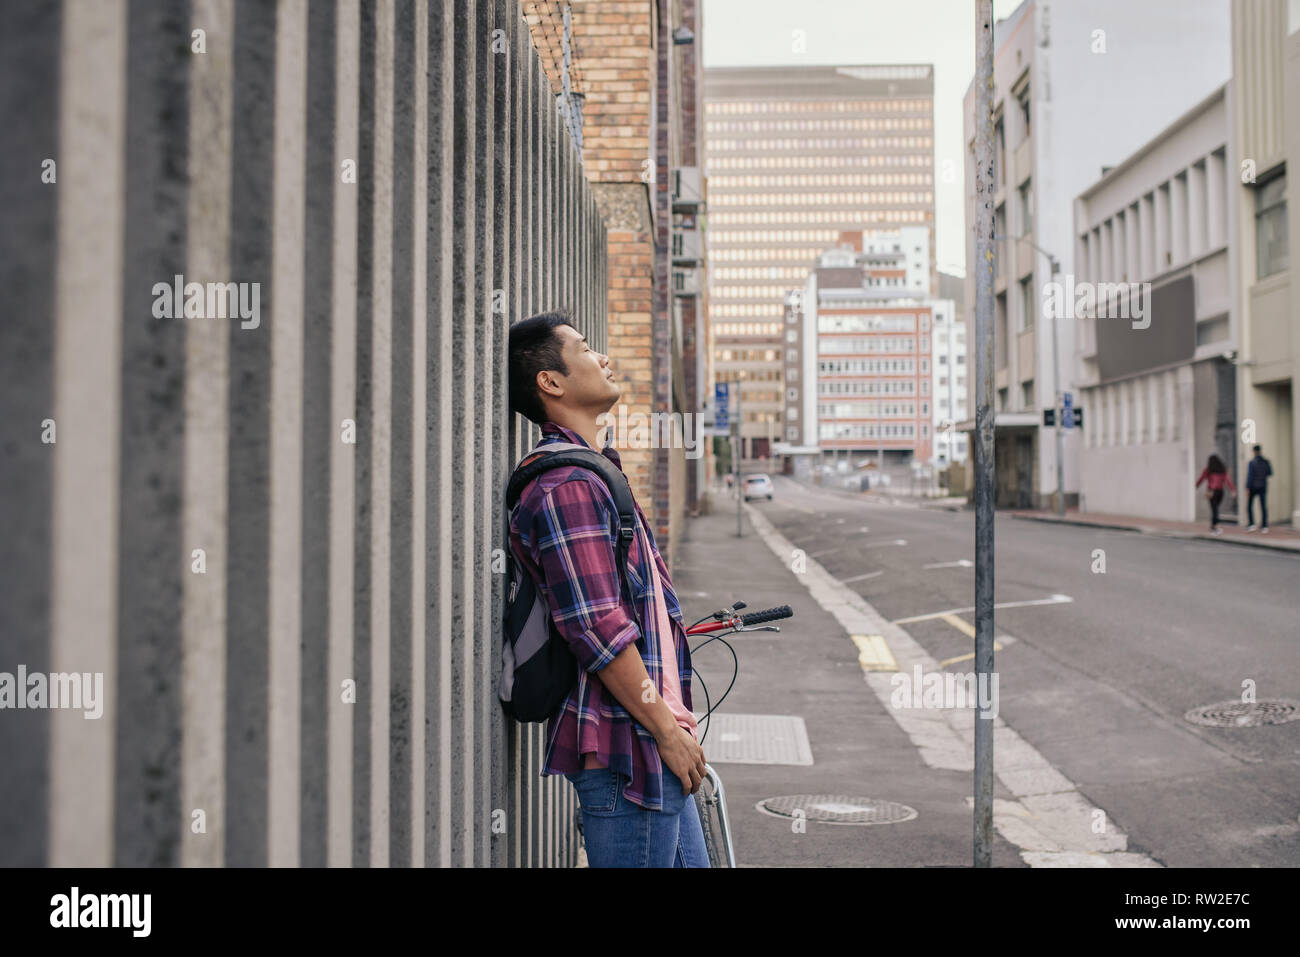 Young man with eyes closed leaning against a city wall Stock Photo